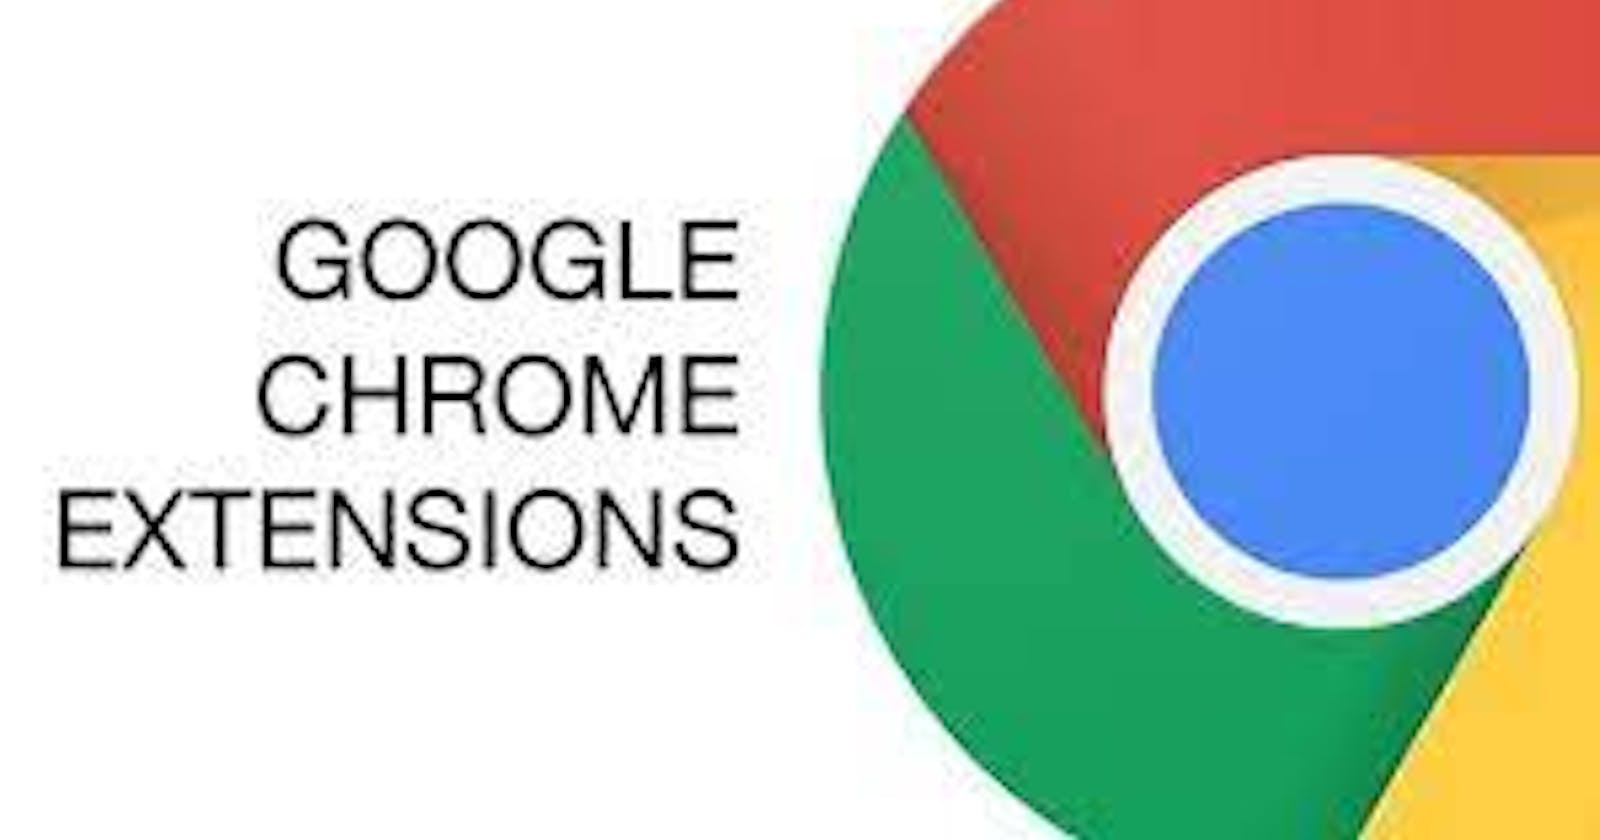 Steps on How to Add a Chrome Extension